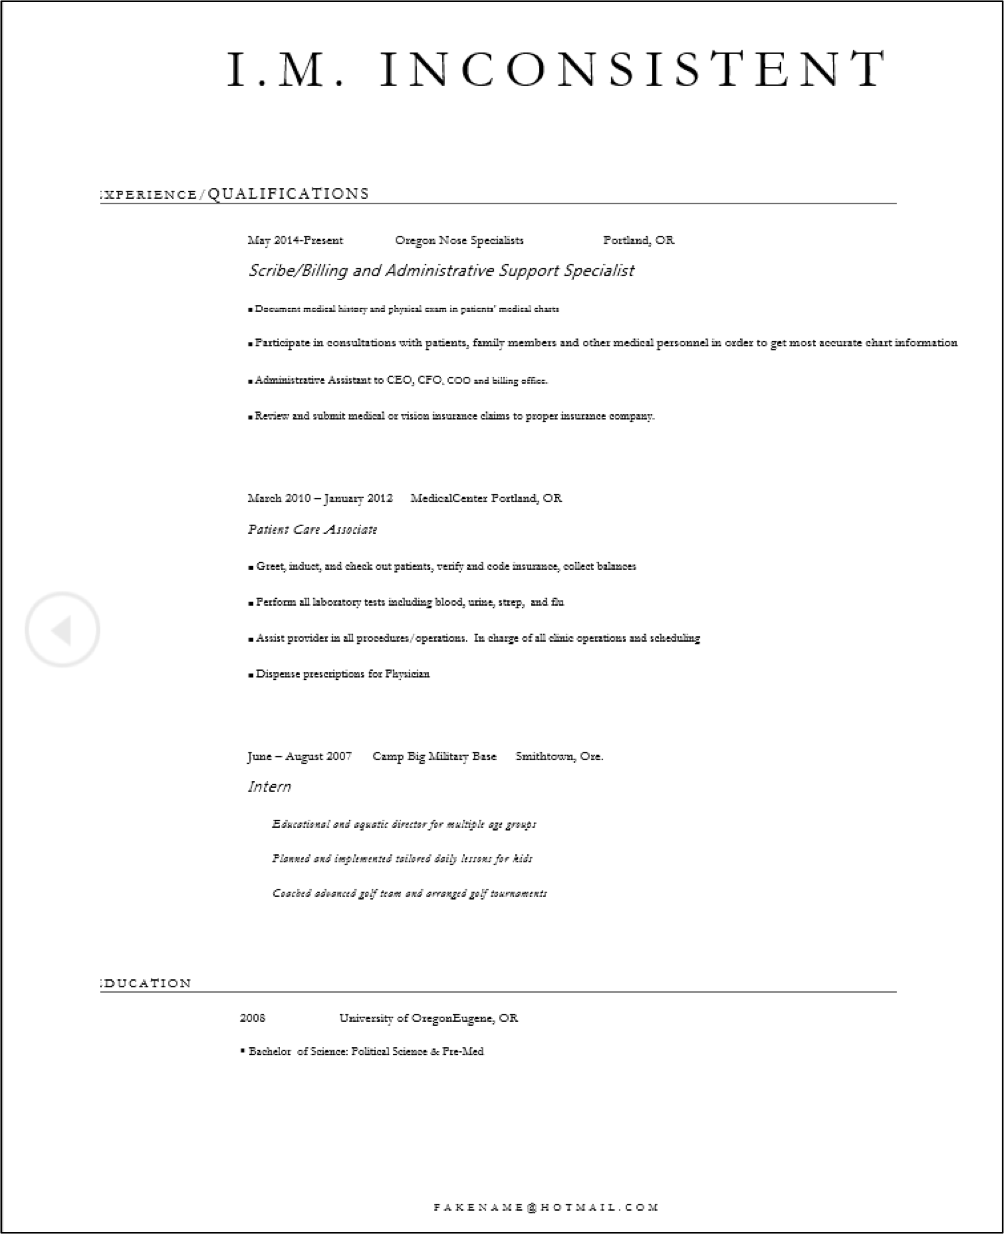 Resume with large title, headings are left aligned and text is centered. There are inconsistent spaces between entries.